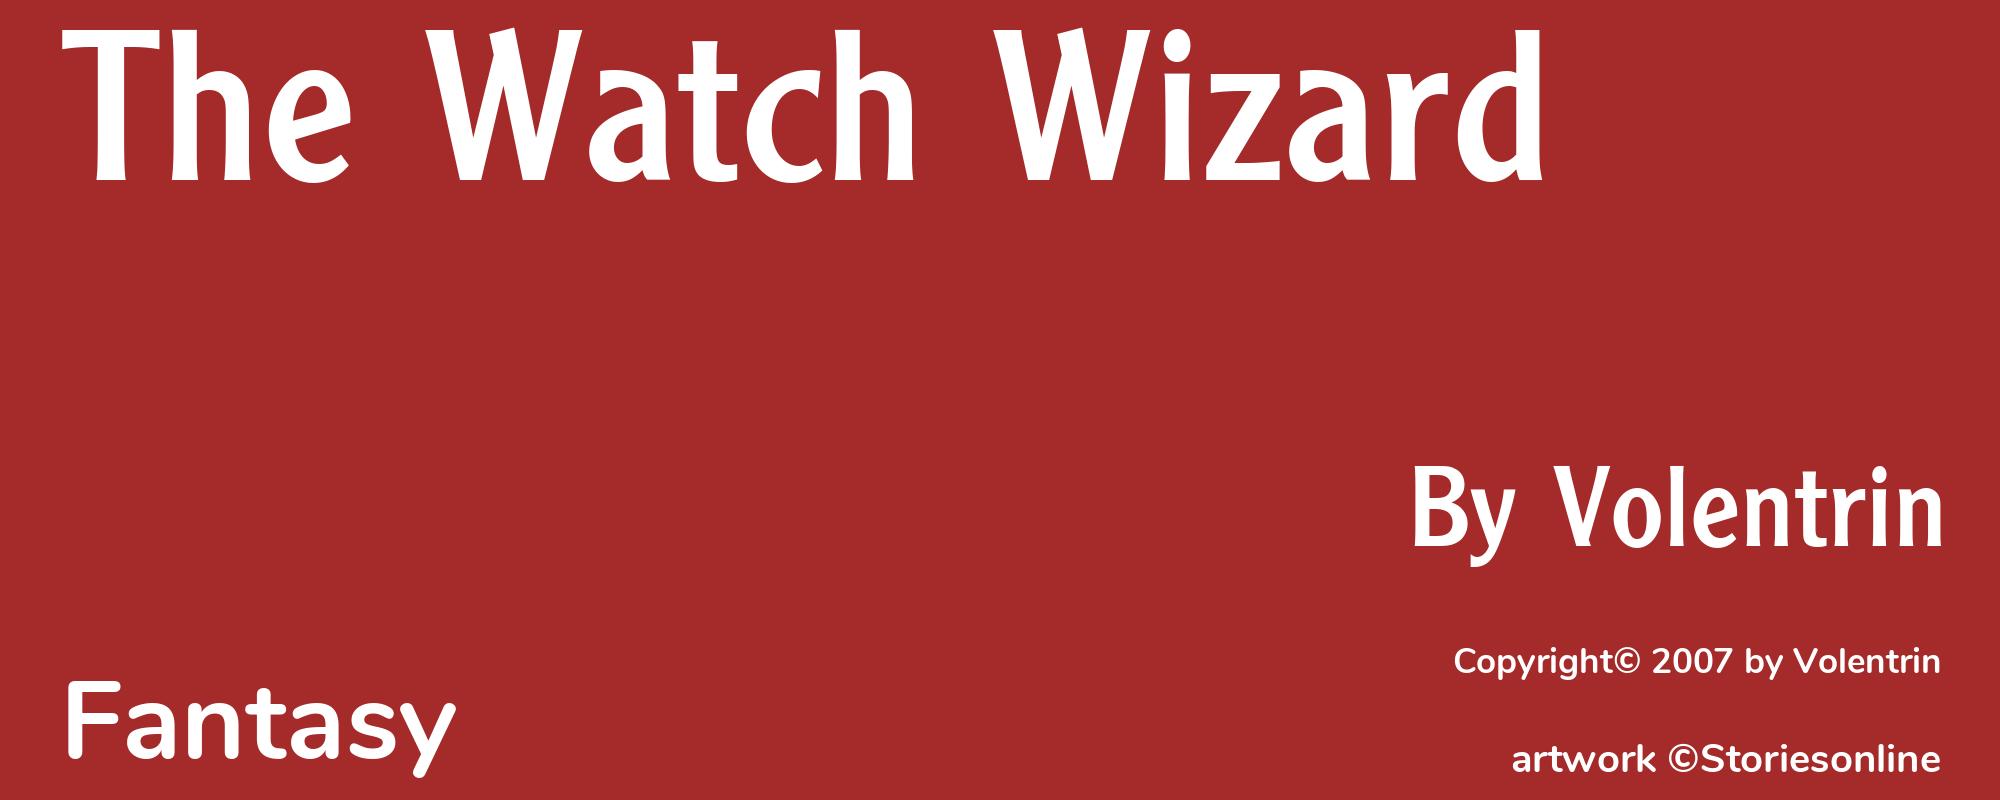 The Watch Wizard - Cover